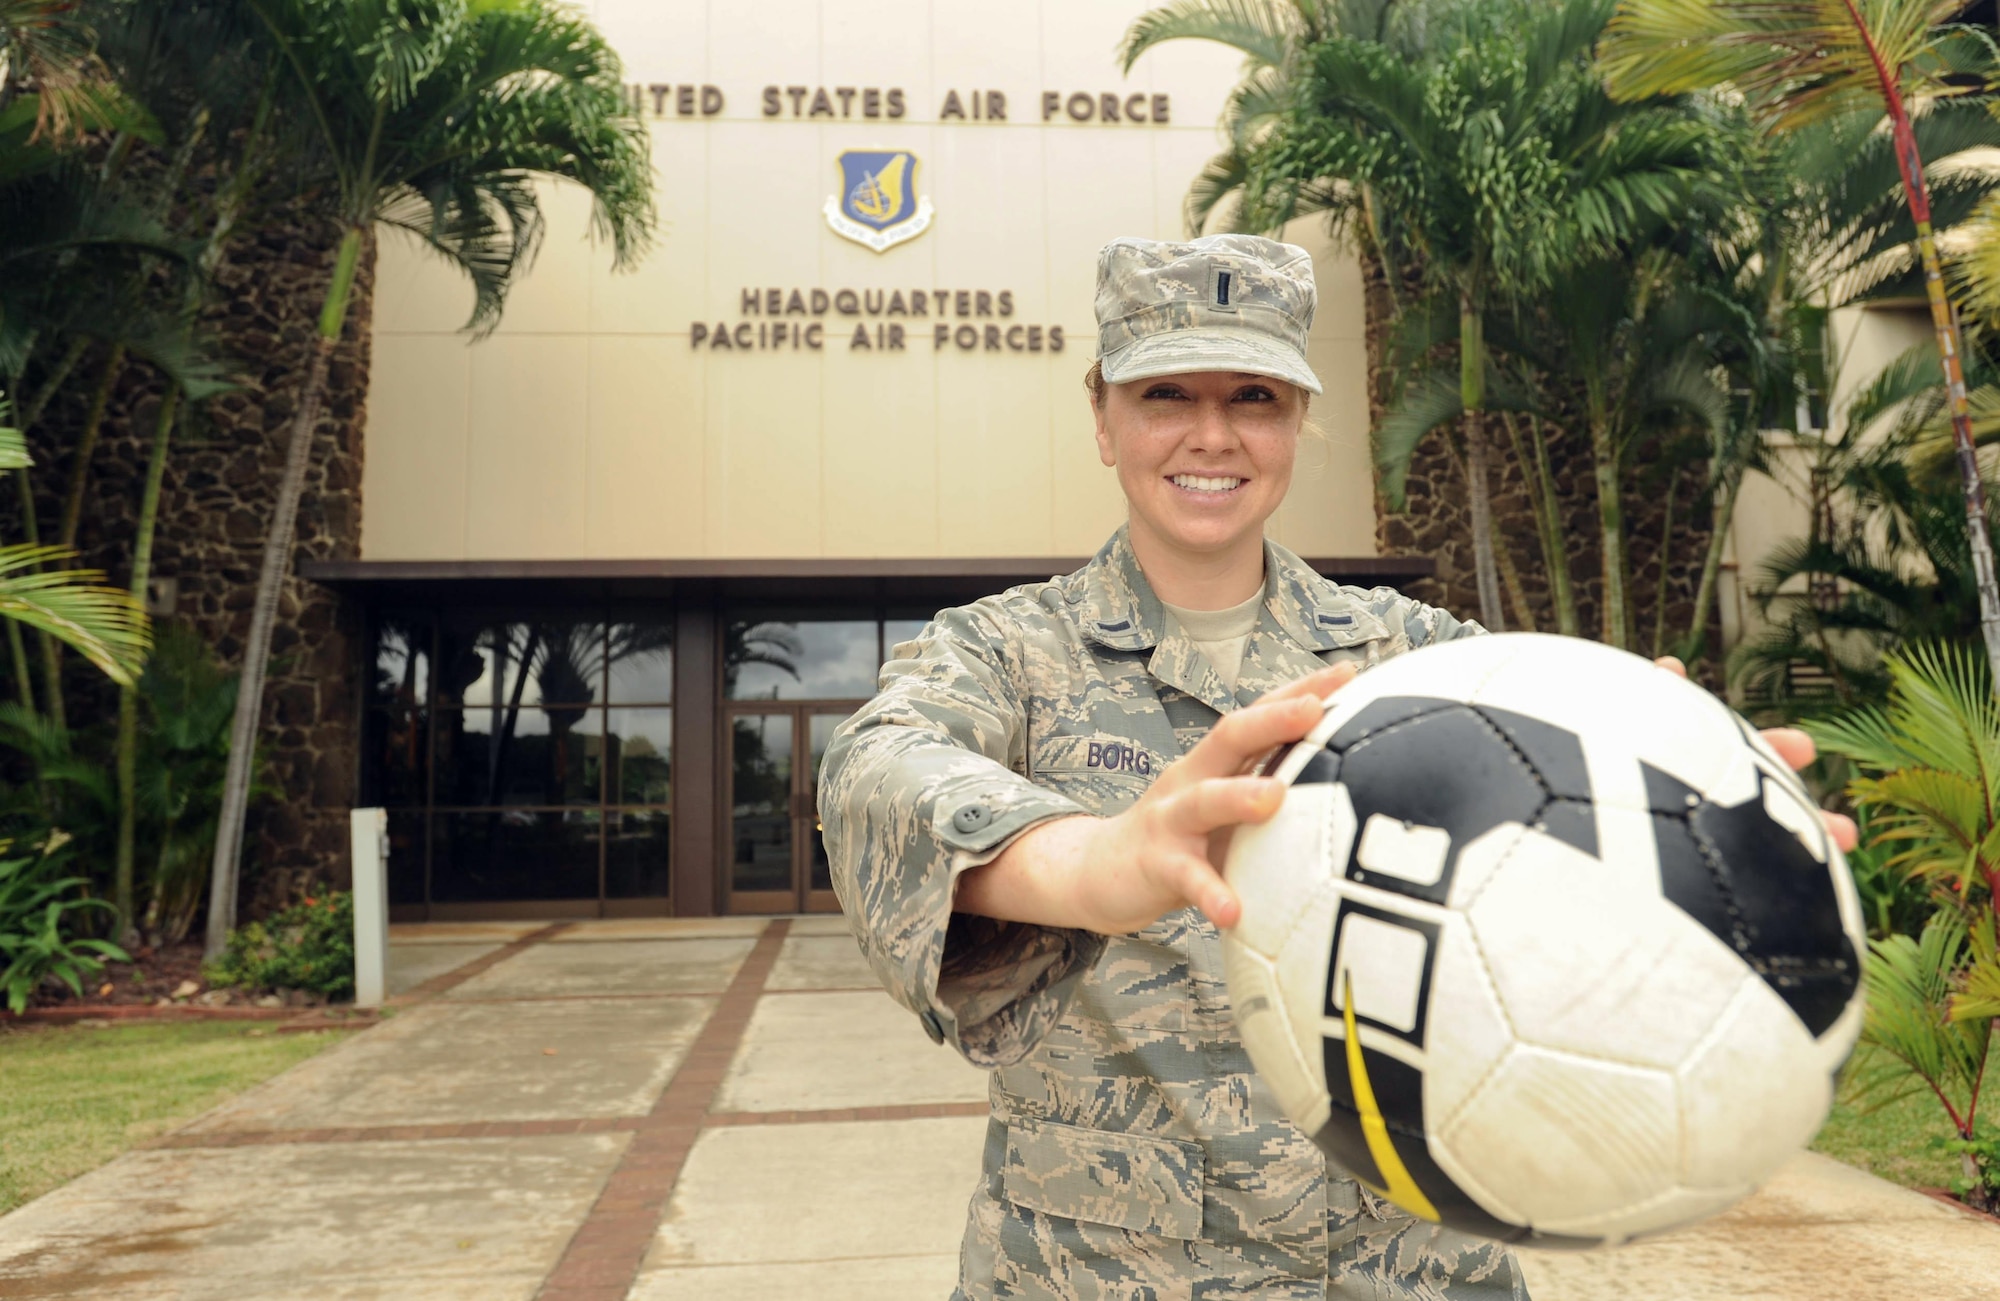 U.S. Air Force 1st Lt. Charity Borg, Headquarters Pacific Air Forces Protocol officer, poses with her soccer ball after returning from the Royal Air Force's AIRCOM Indoor Football Championship in the United Kingdom, Nov. 30, 2015, Joint Base Pearl Harbor-Hickam, Hawaii. Borg, goalie and captain for the U.S. Air Force women's team, was recruited to play after a long hiatus away from the sport, and the team took bronze in the tournament. (U.S. Air Force photo by Tech. Sgt. Amanda Dick/Released)